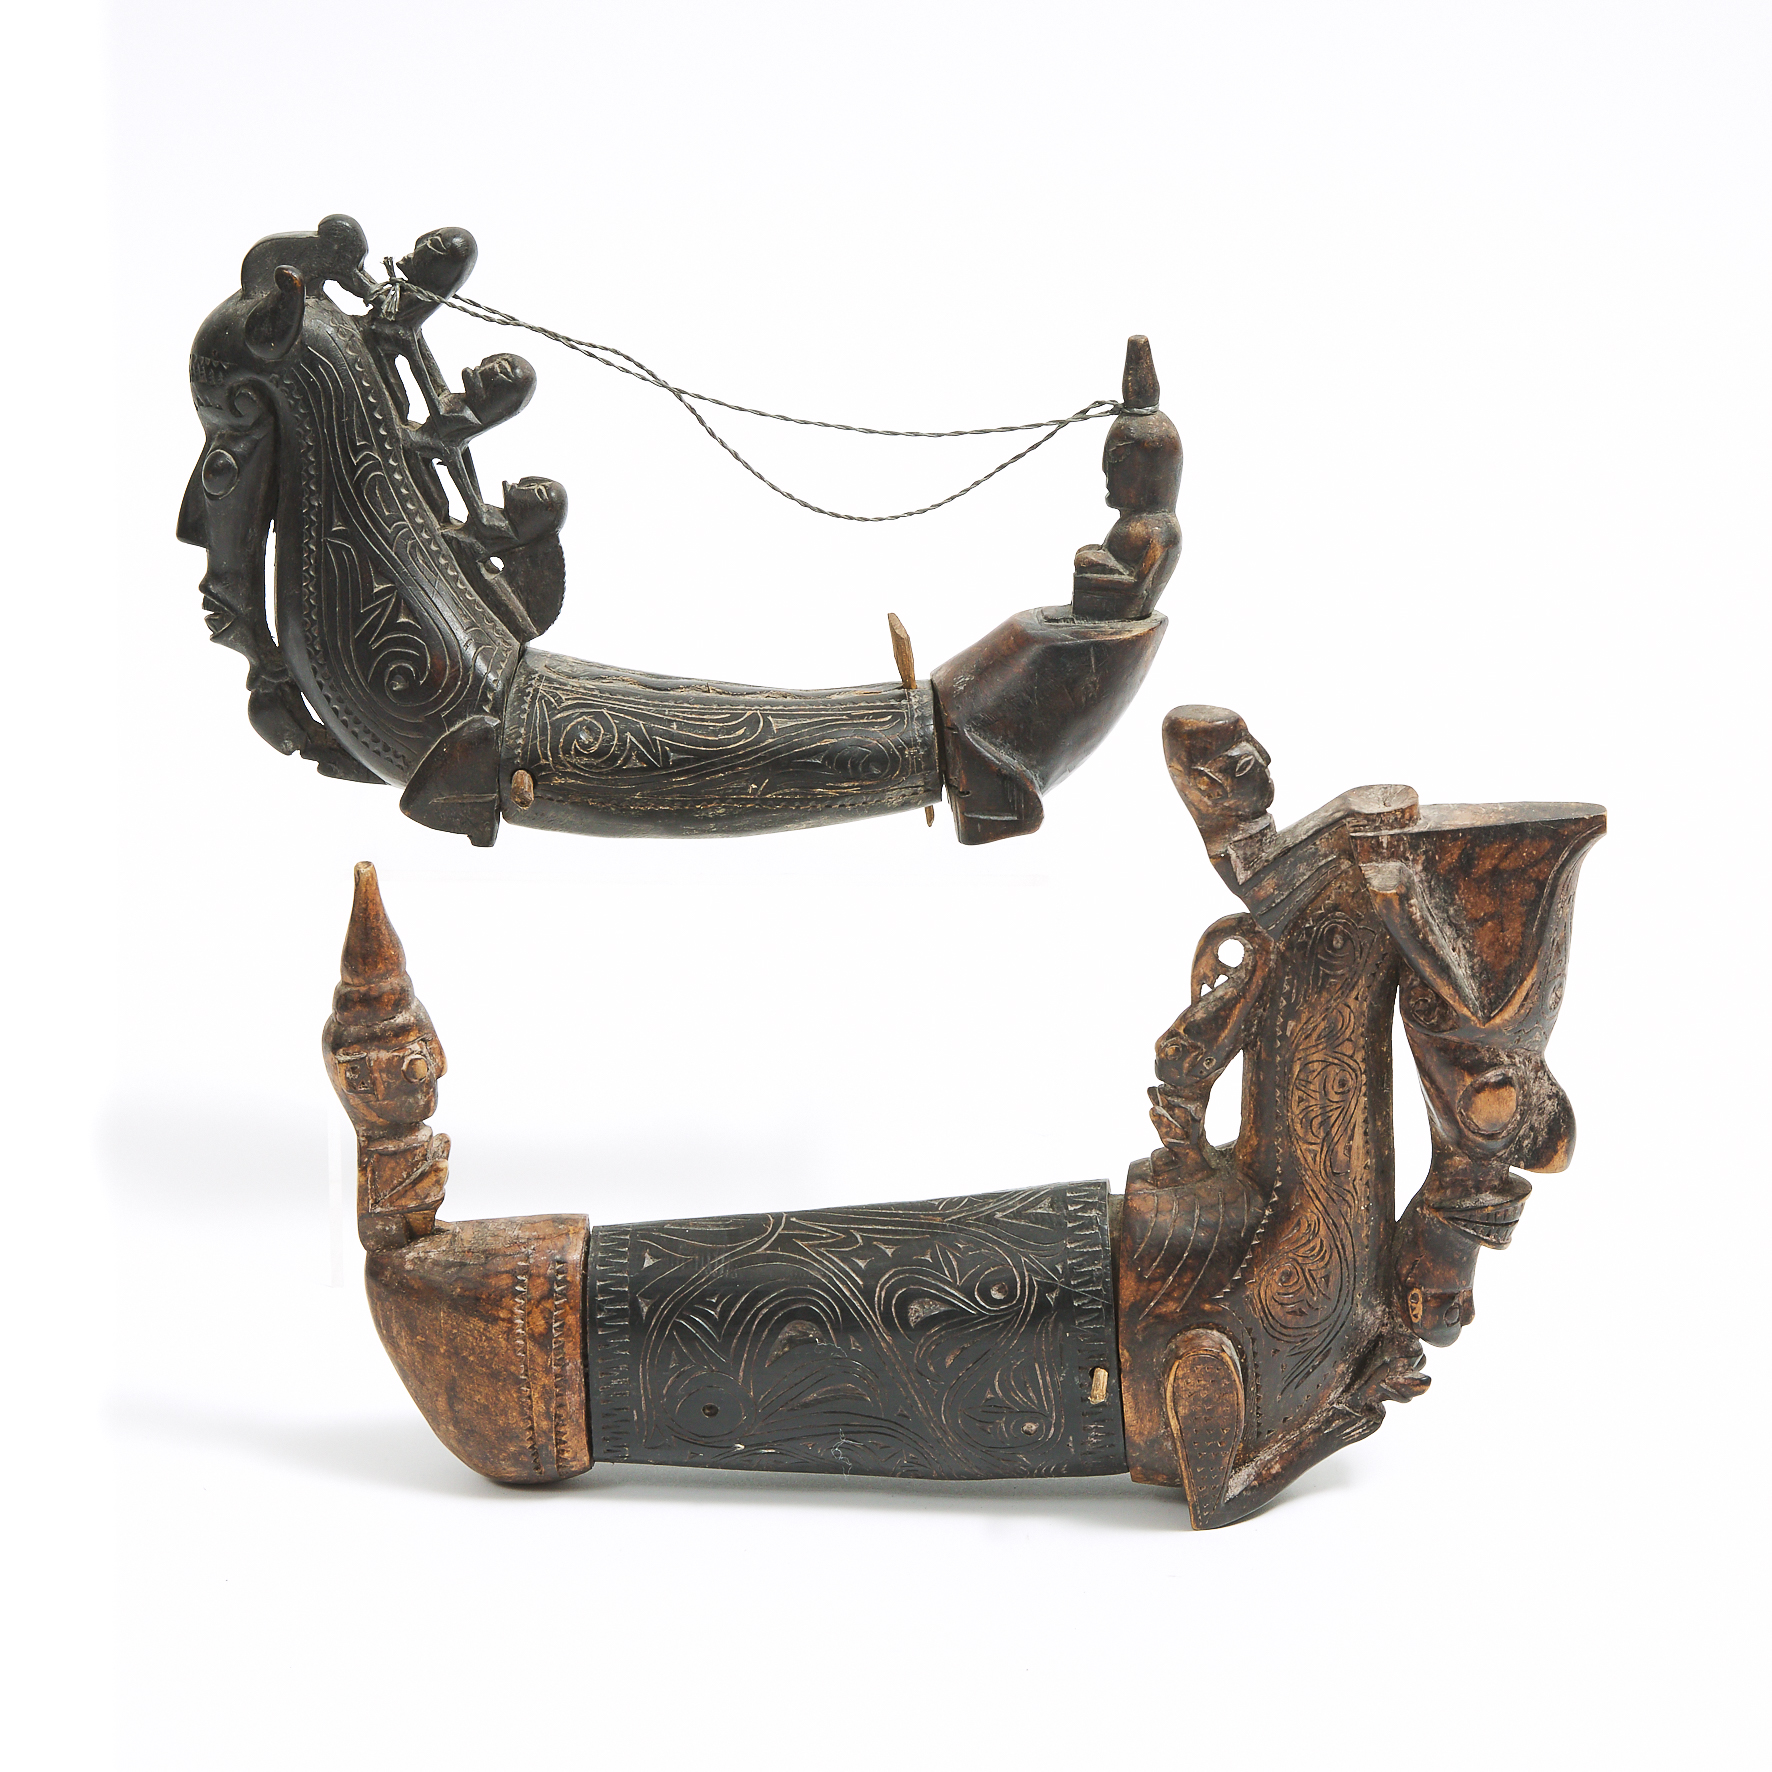 Two Batak Toba Medicine Containers, North Sumatra, Indonesia, early to mid 20th century